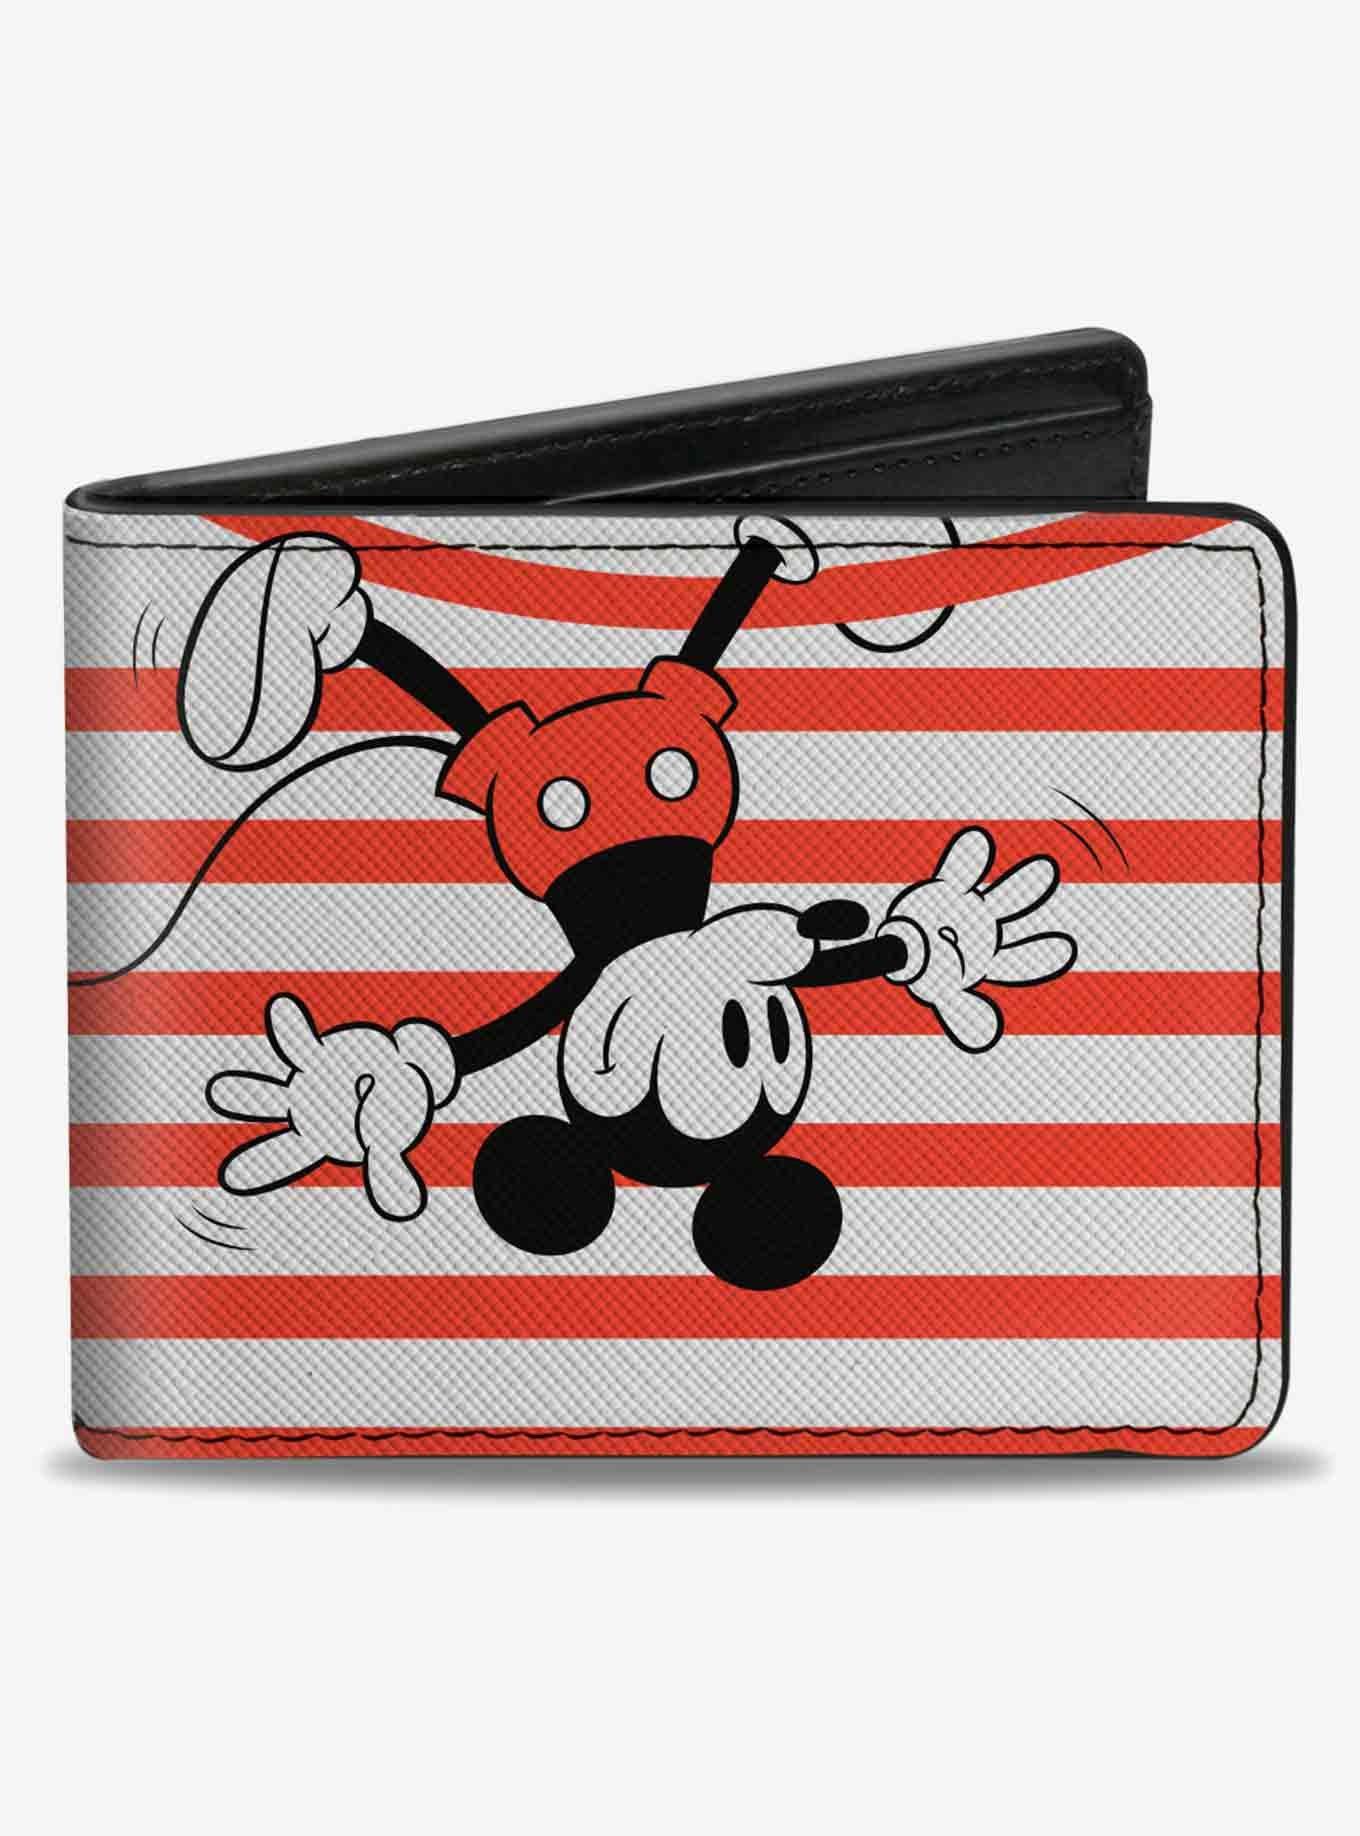 New Disney Parks Loungefly Wallet Mickey Mouse Snack Treats Food NWT